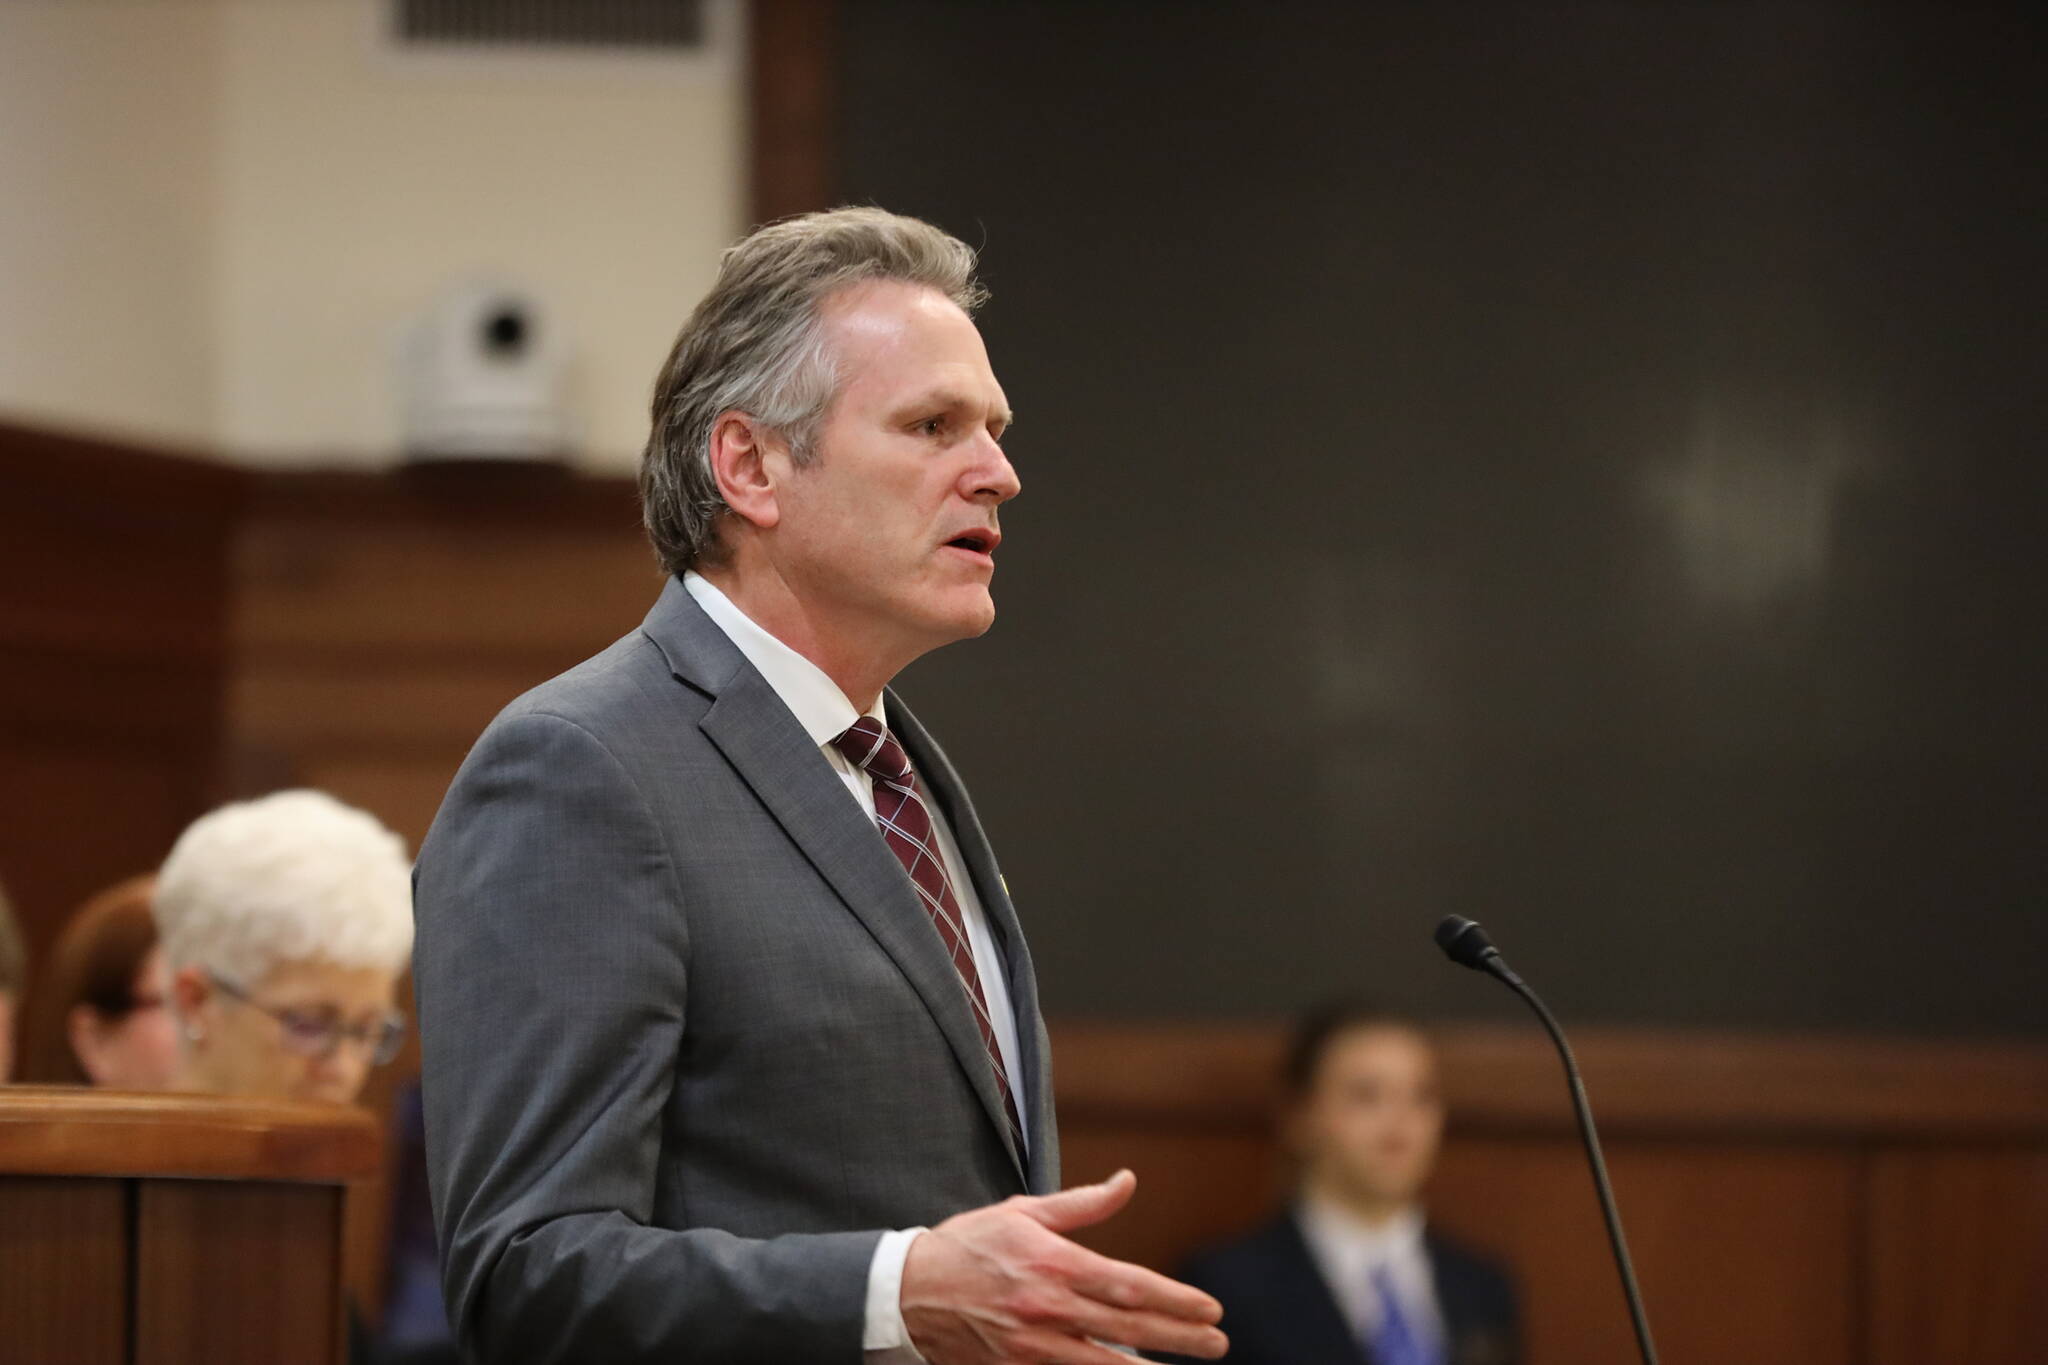 Gov. Mike Dunleavy addresses state lawmakers and guests attending his State of the State speech Monday night before a joint session of the Alaska State Legislature at the Alaska State Capitol. The 50-minute speech was praised by many legislators as more positive and less confrontational than his first address four years ago. (Clarise Larson / Juneau Empire)
Gov. Mike Dunleavy addresses state lawmakers and guests attending his State of the State speech Monday night before a joint session of the Alaska State Legislature at the Alaska State Capitol. The 50-minute speech was praised by many legislators as more positive and less confrontational than his first address four years ago. (Clarise Larson / Juneau Empire)